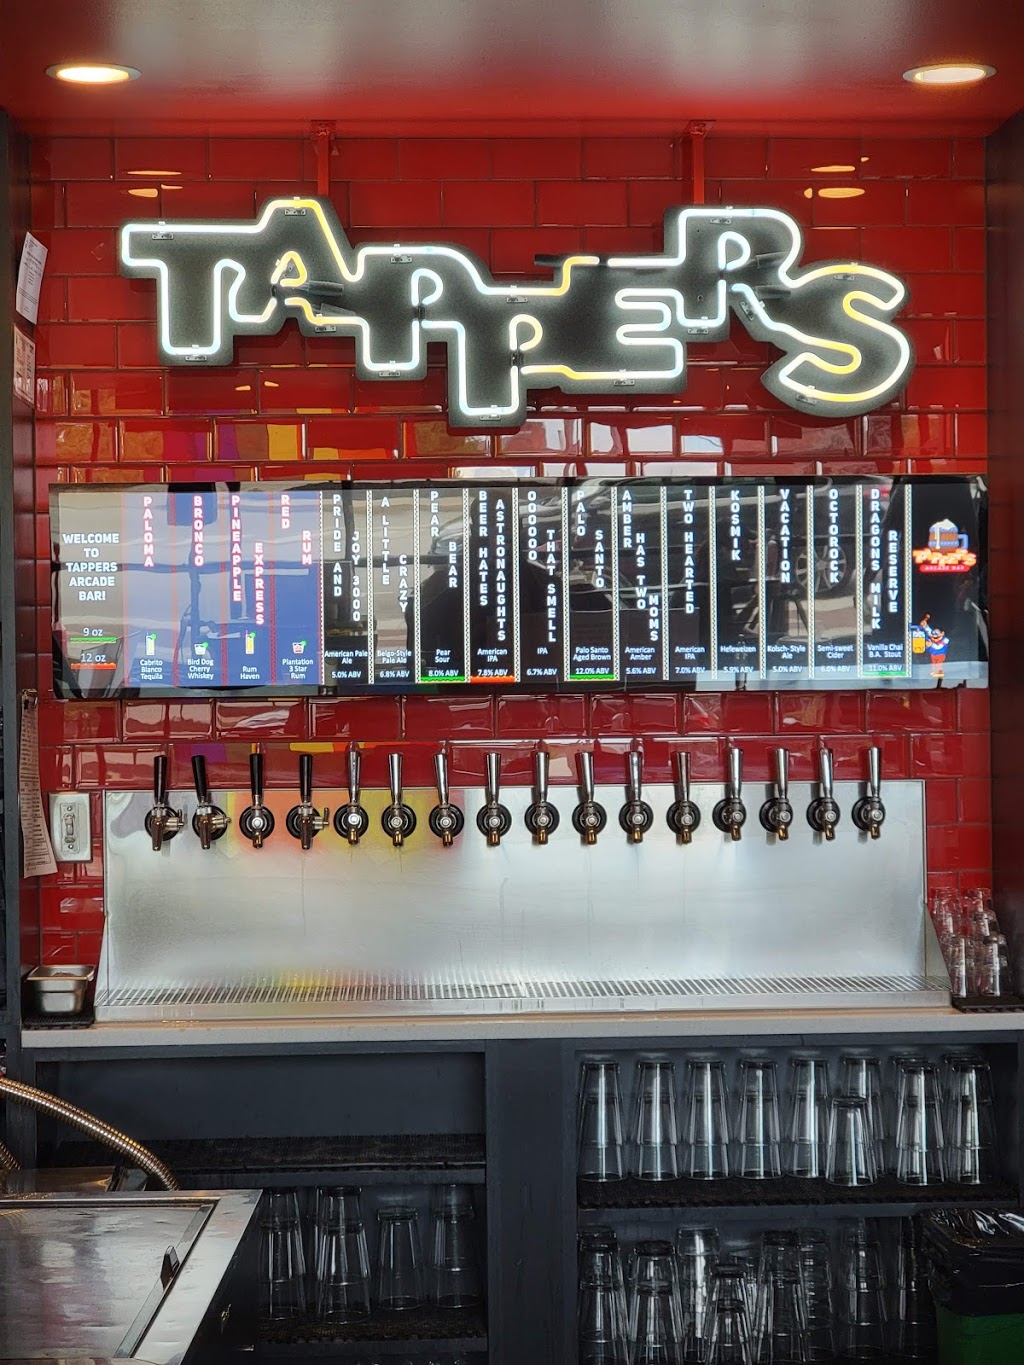 Tappers Arcade Bar | 501 Virginia Ave #102, Indianapolis, IN 46203 | Phone: (317) 602-6411